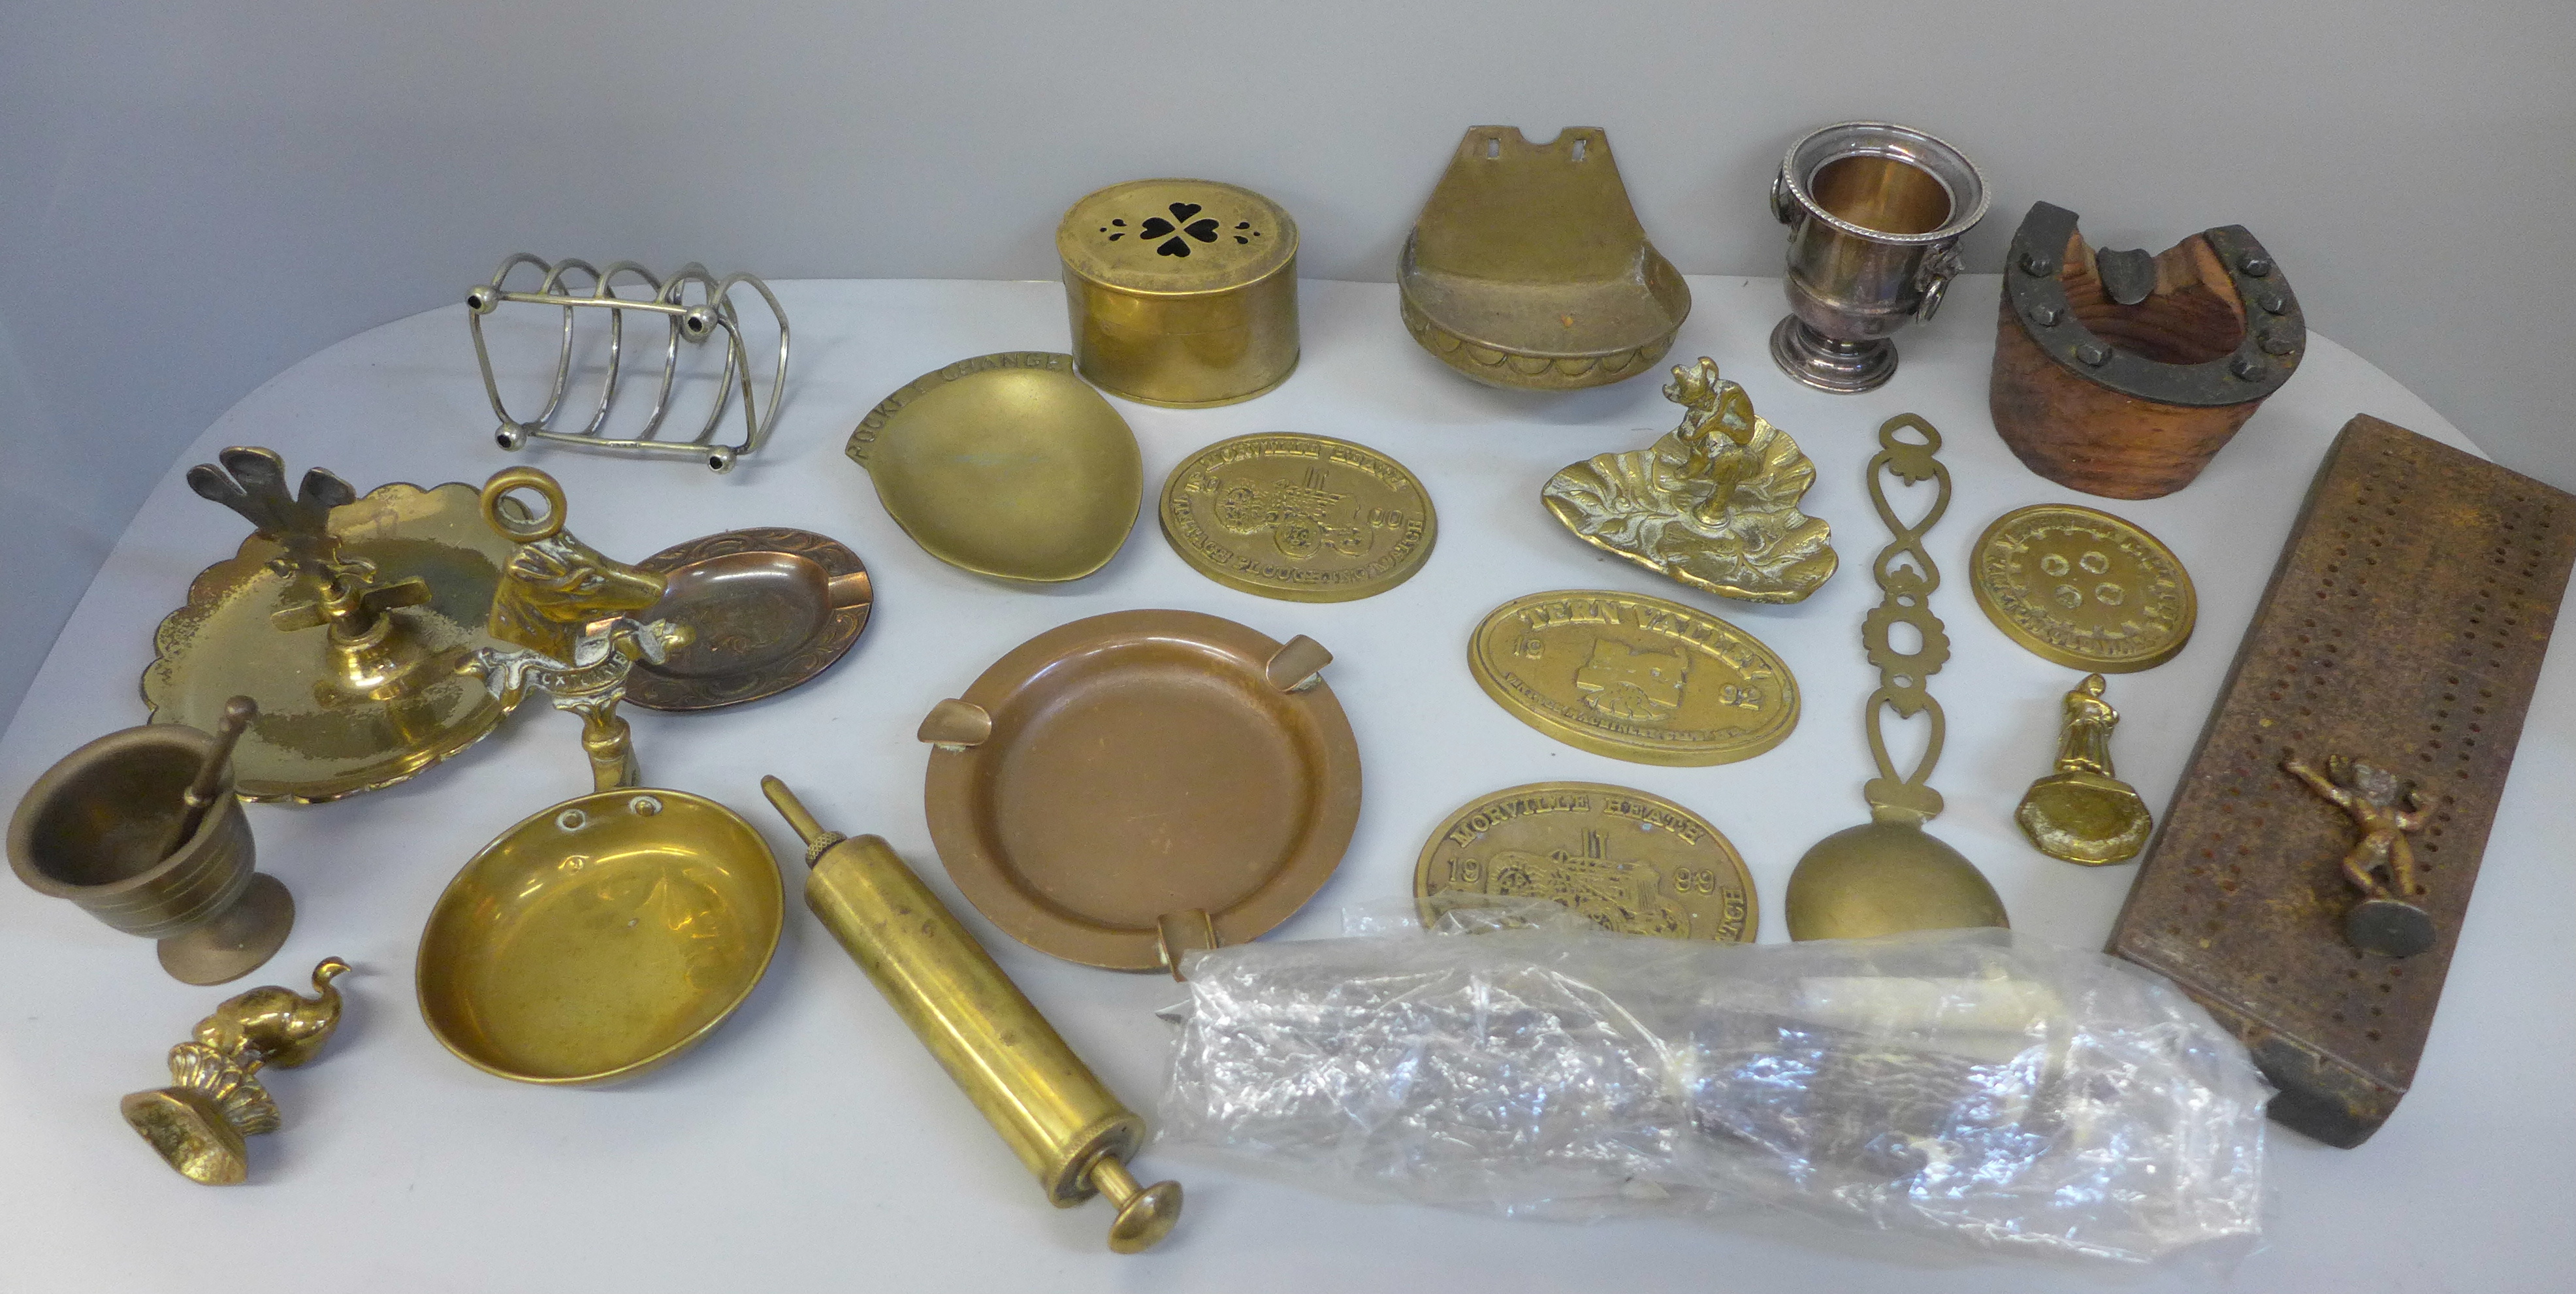 A collection of metalware including brass and a wooden cribbage board